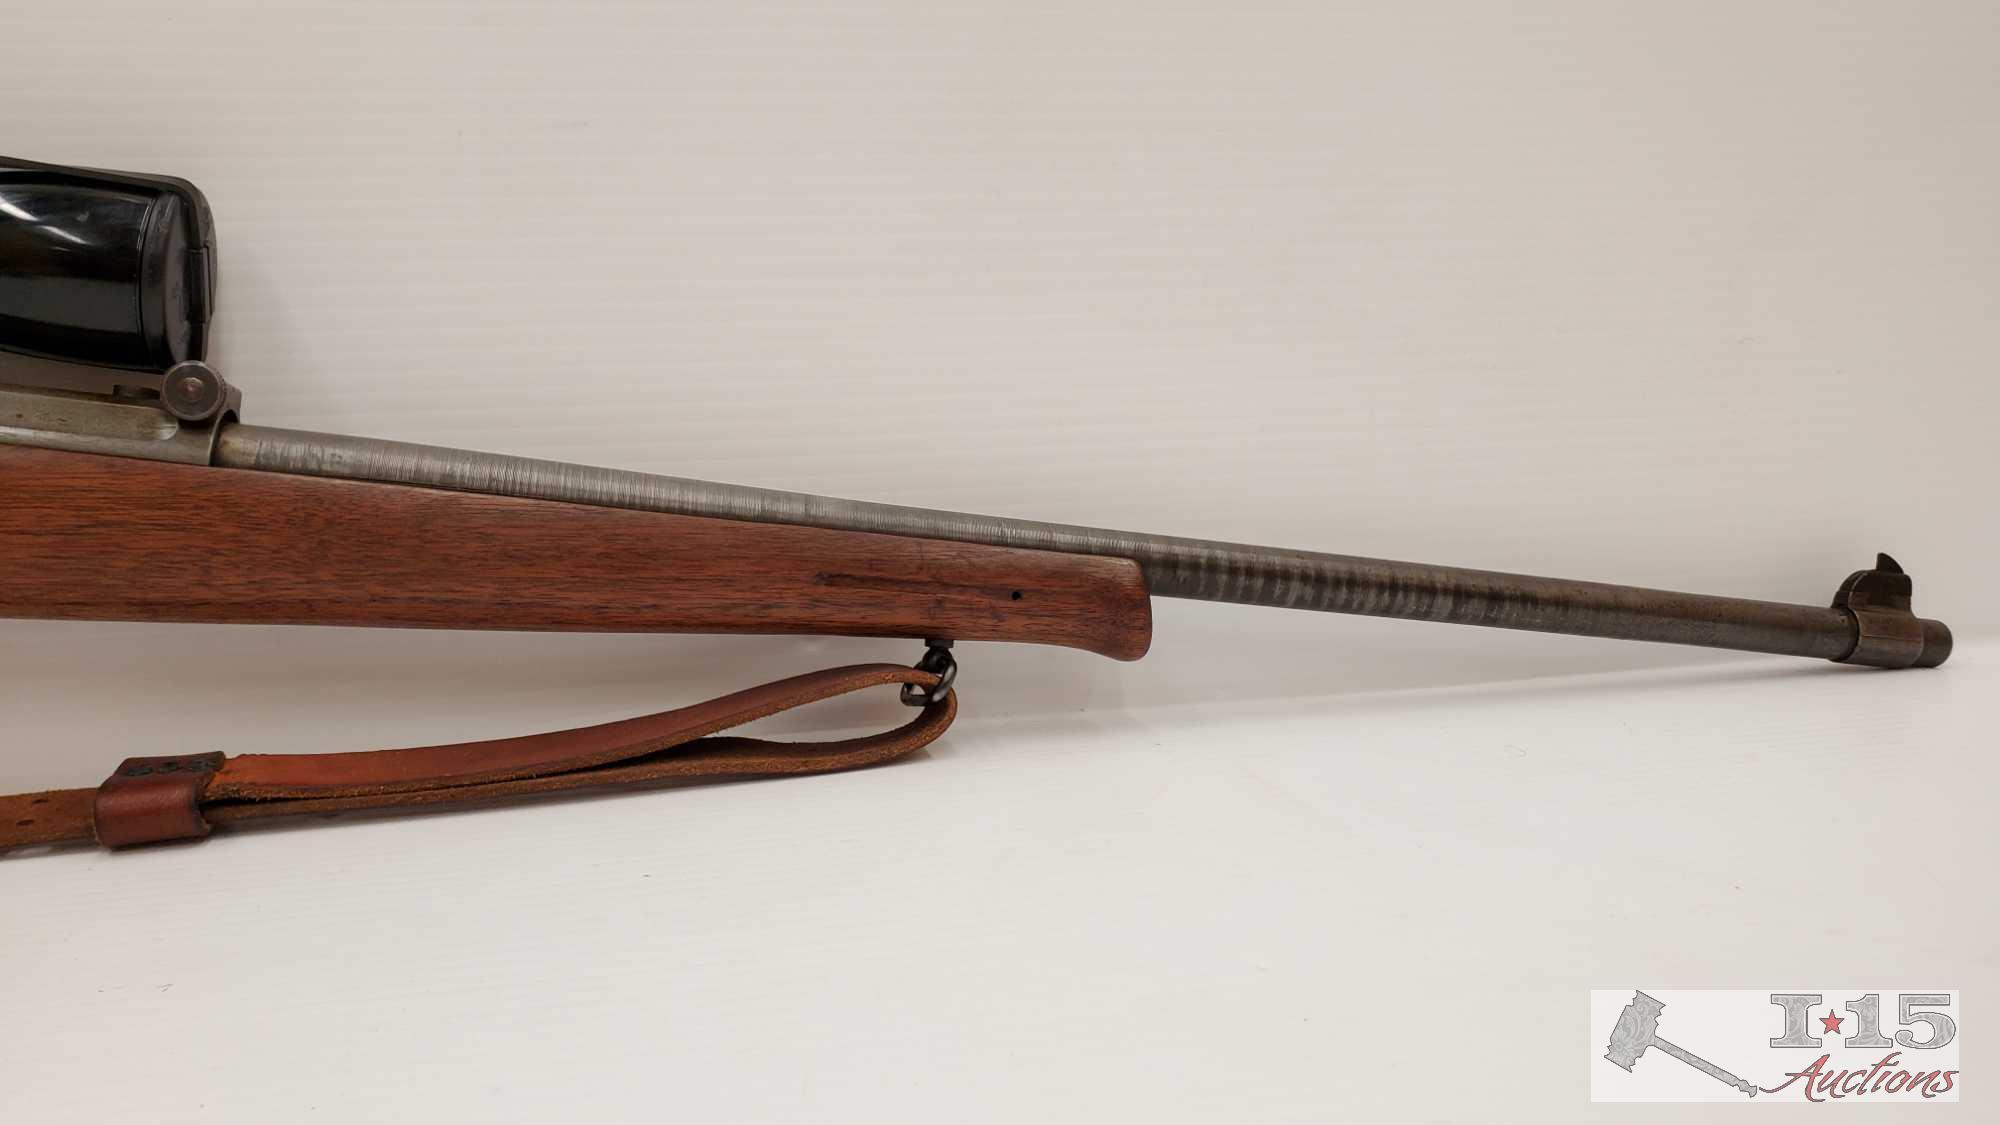 Springfield Armory Model 1903 Bolt Action Rifle with Bushnell Scope